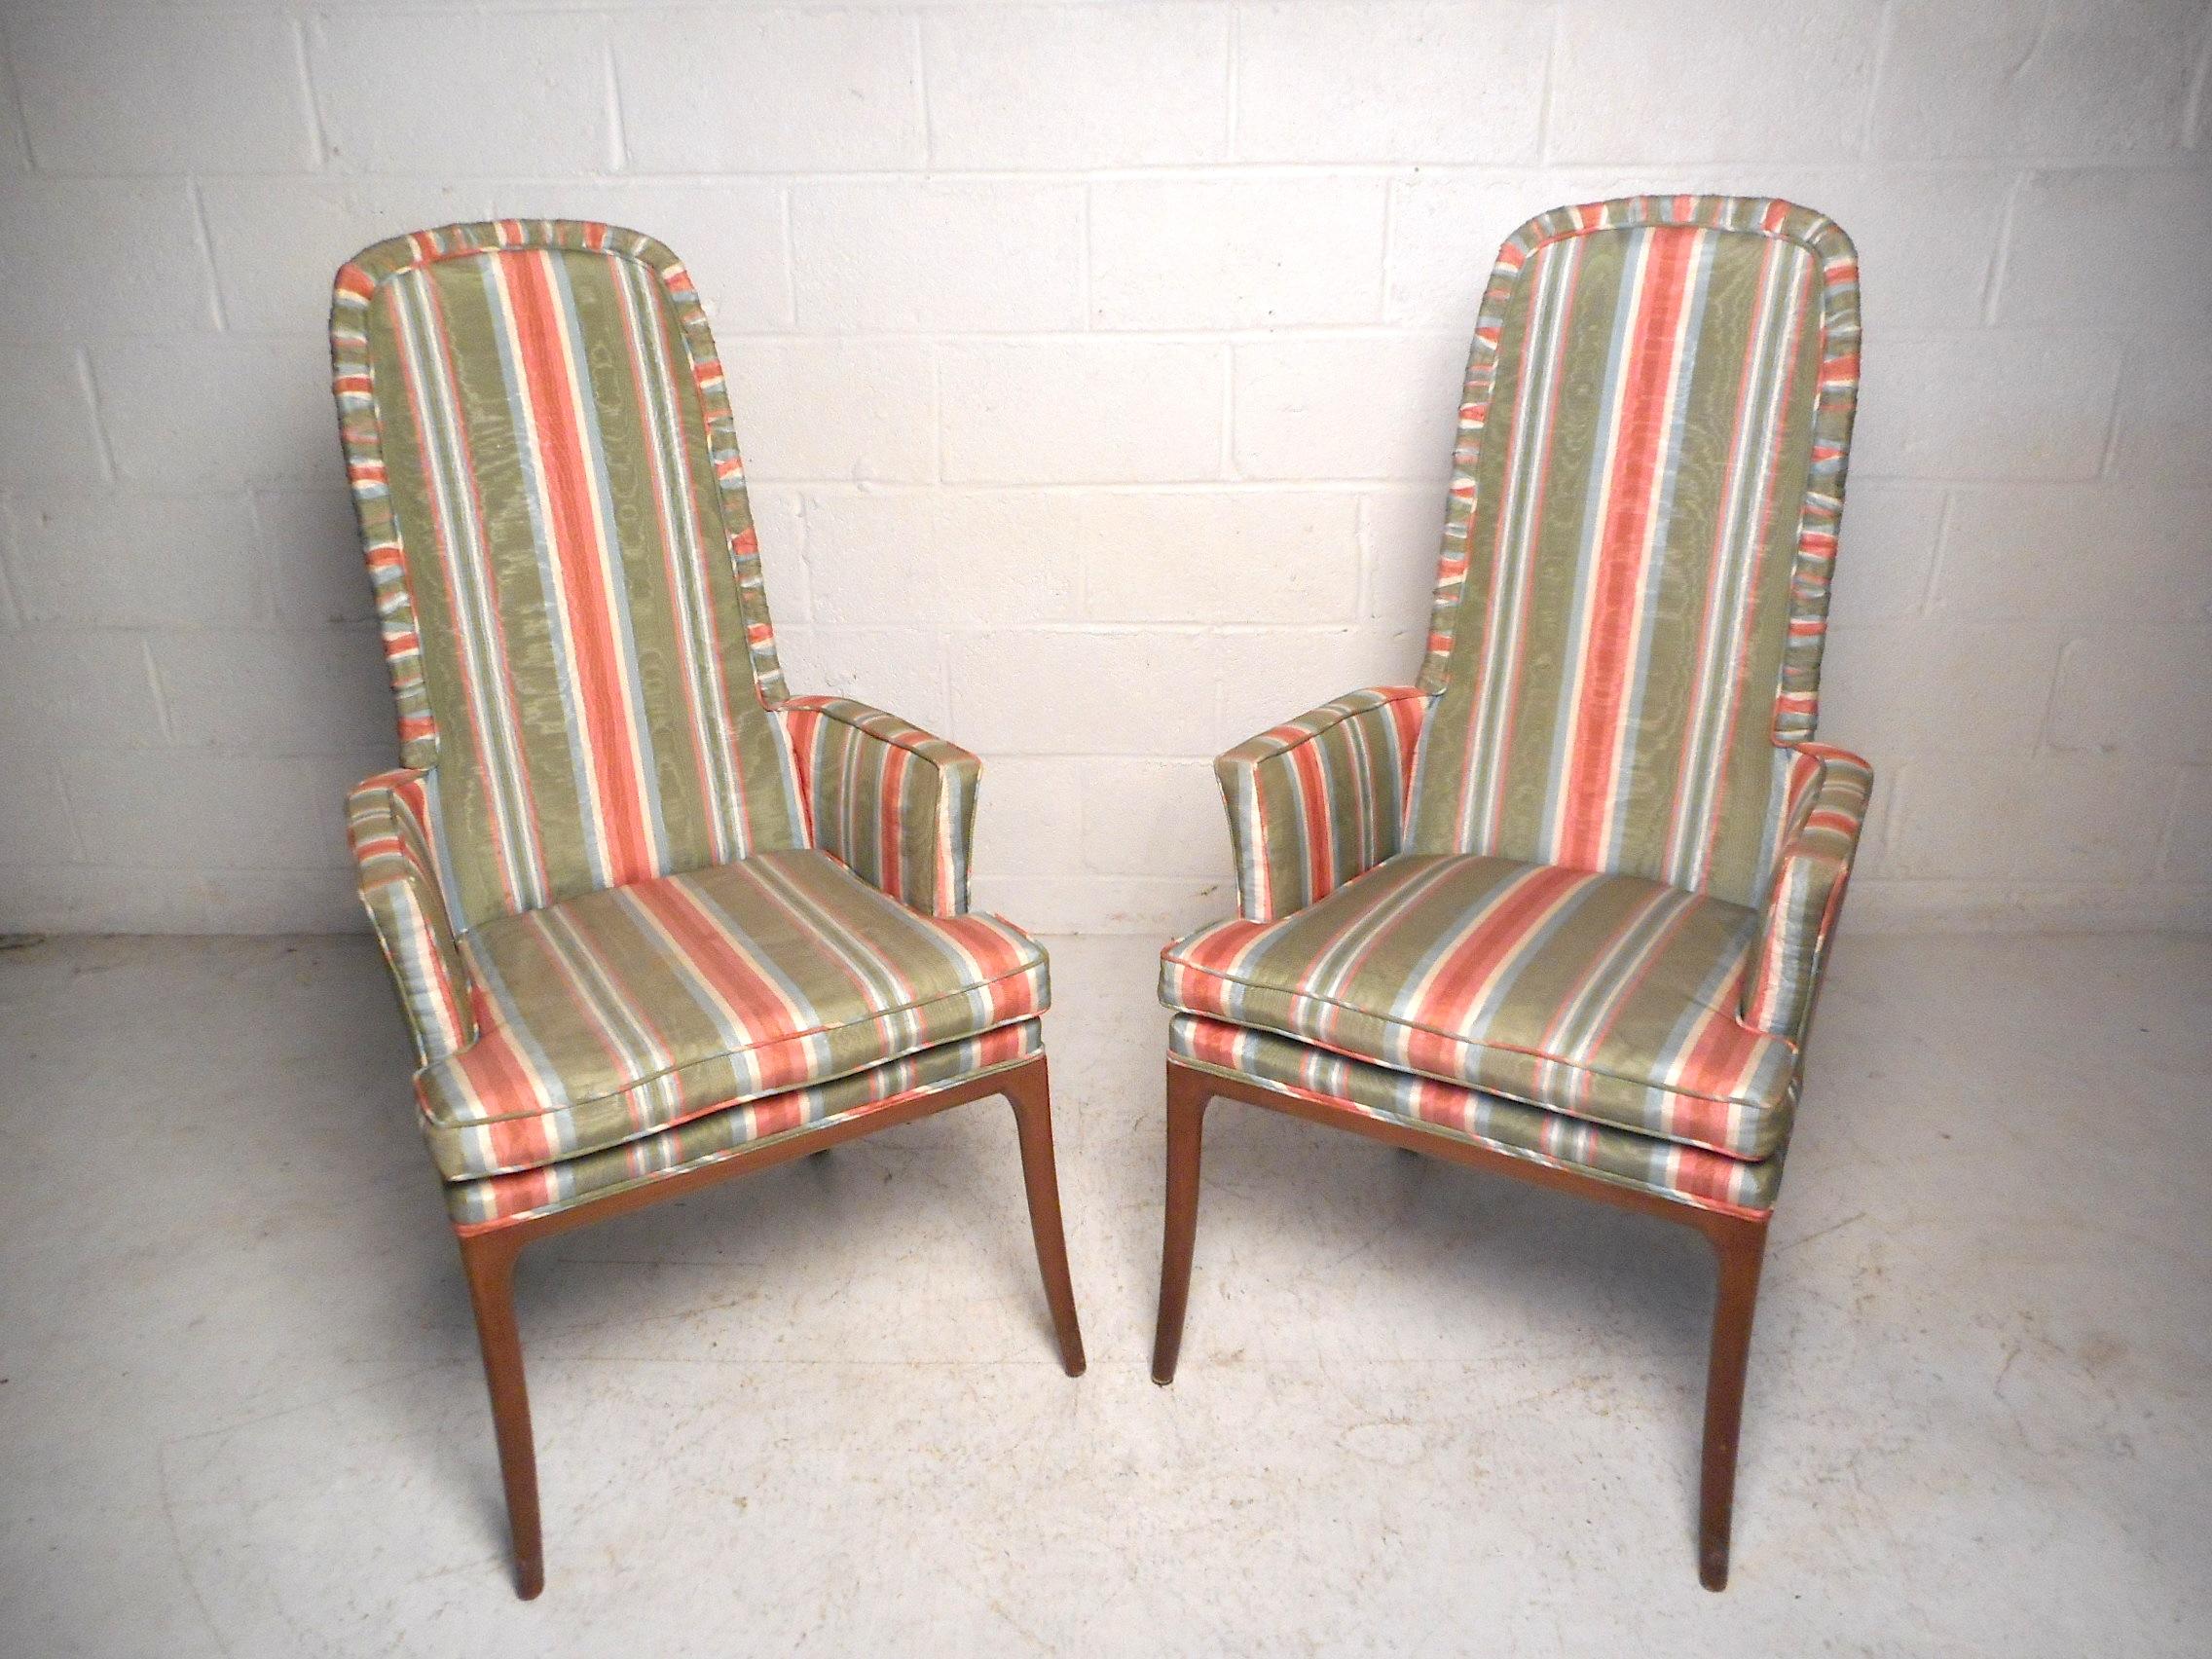 This impressive pair of midcentury chairs feature a vintage striped upholstery and sturdy wooden frames with sleekly splayed legs. This pair would make a great addition to any modern interior's seating arrangement. Please confirm item location with